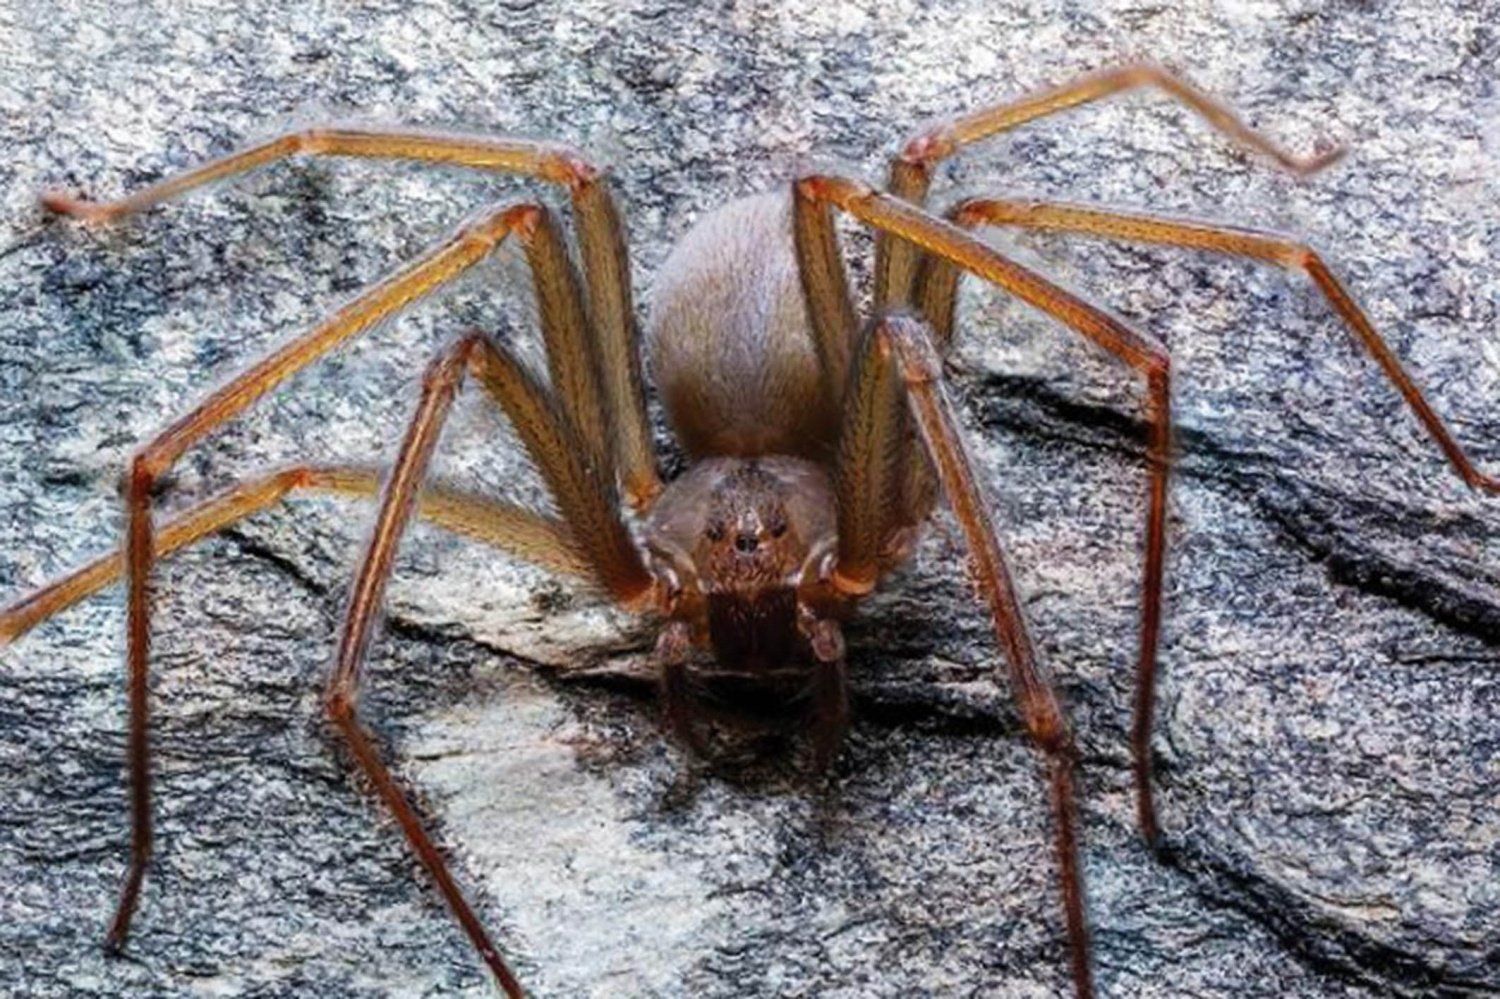 Newly Discovered Spider Species Can Rot Human Flesh With One Bite